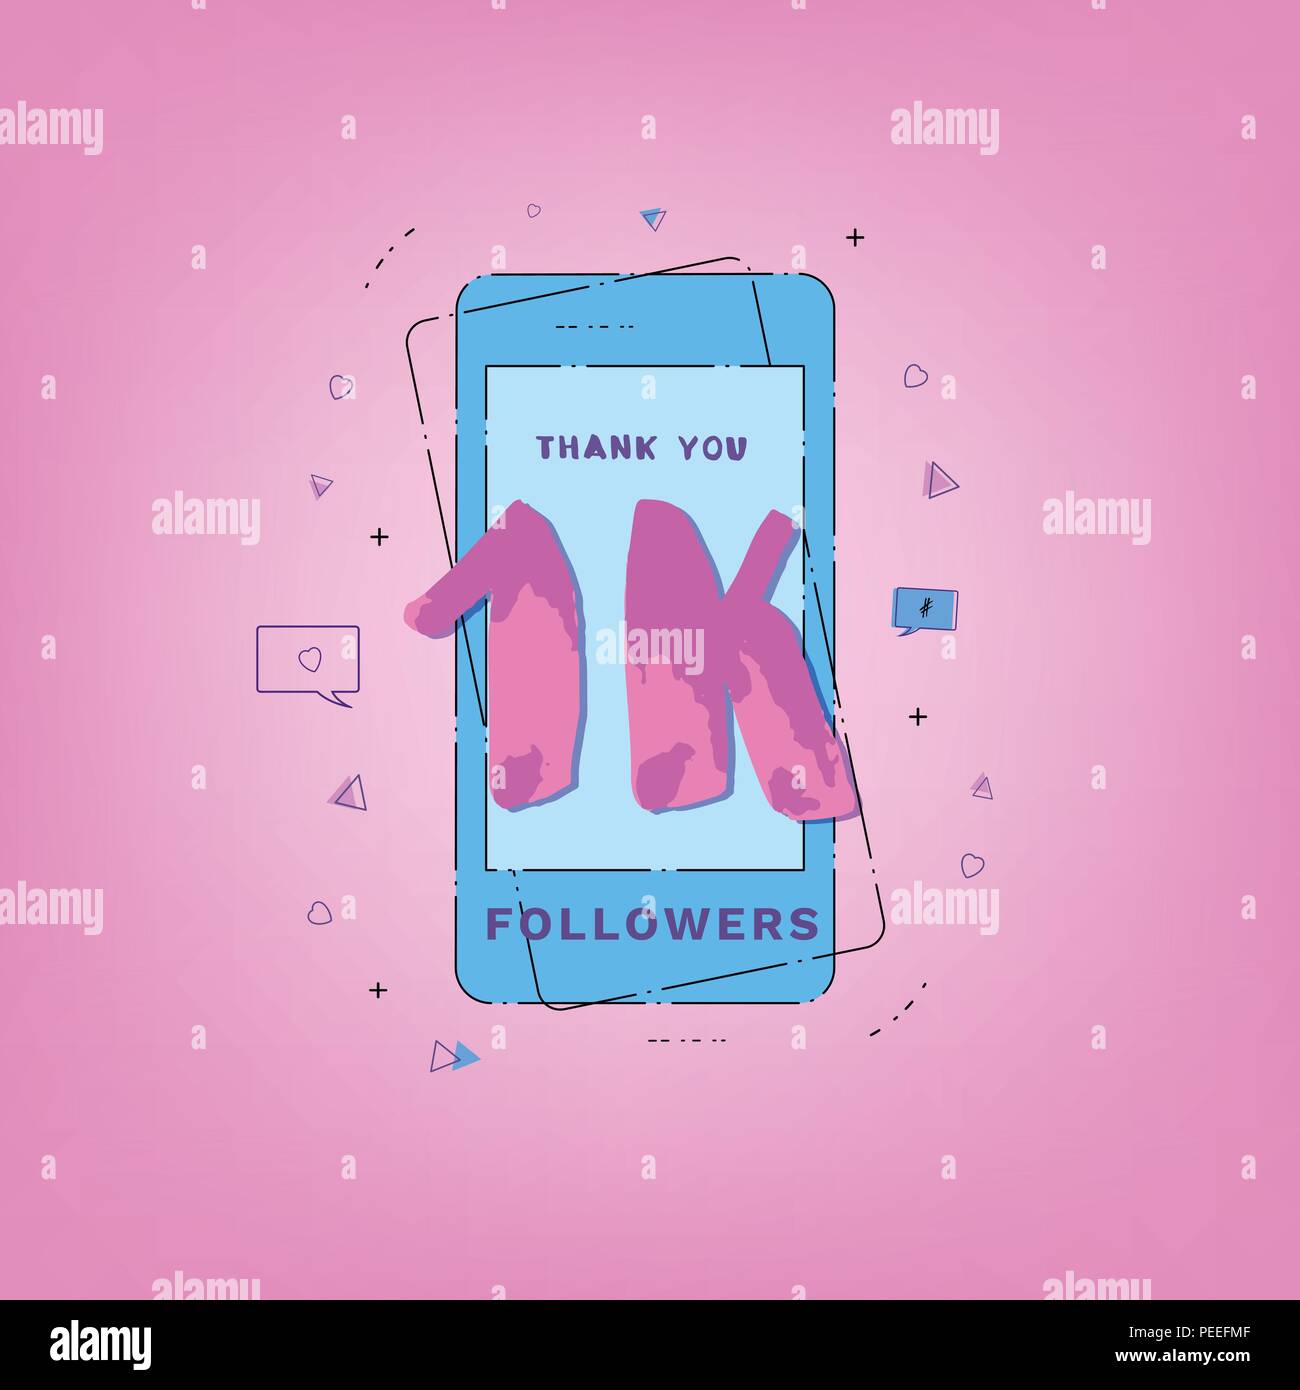 Thank you 1K followers card. Template for Social Network. 1000 subscribers message. Vector illustration. Stock Vector